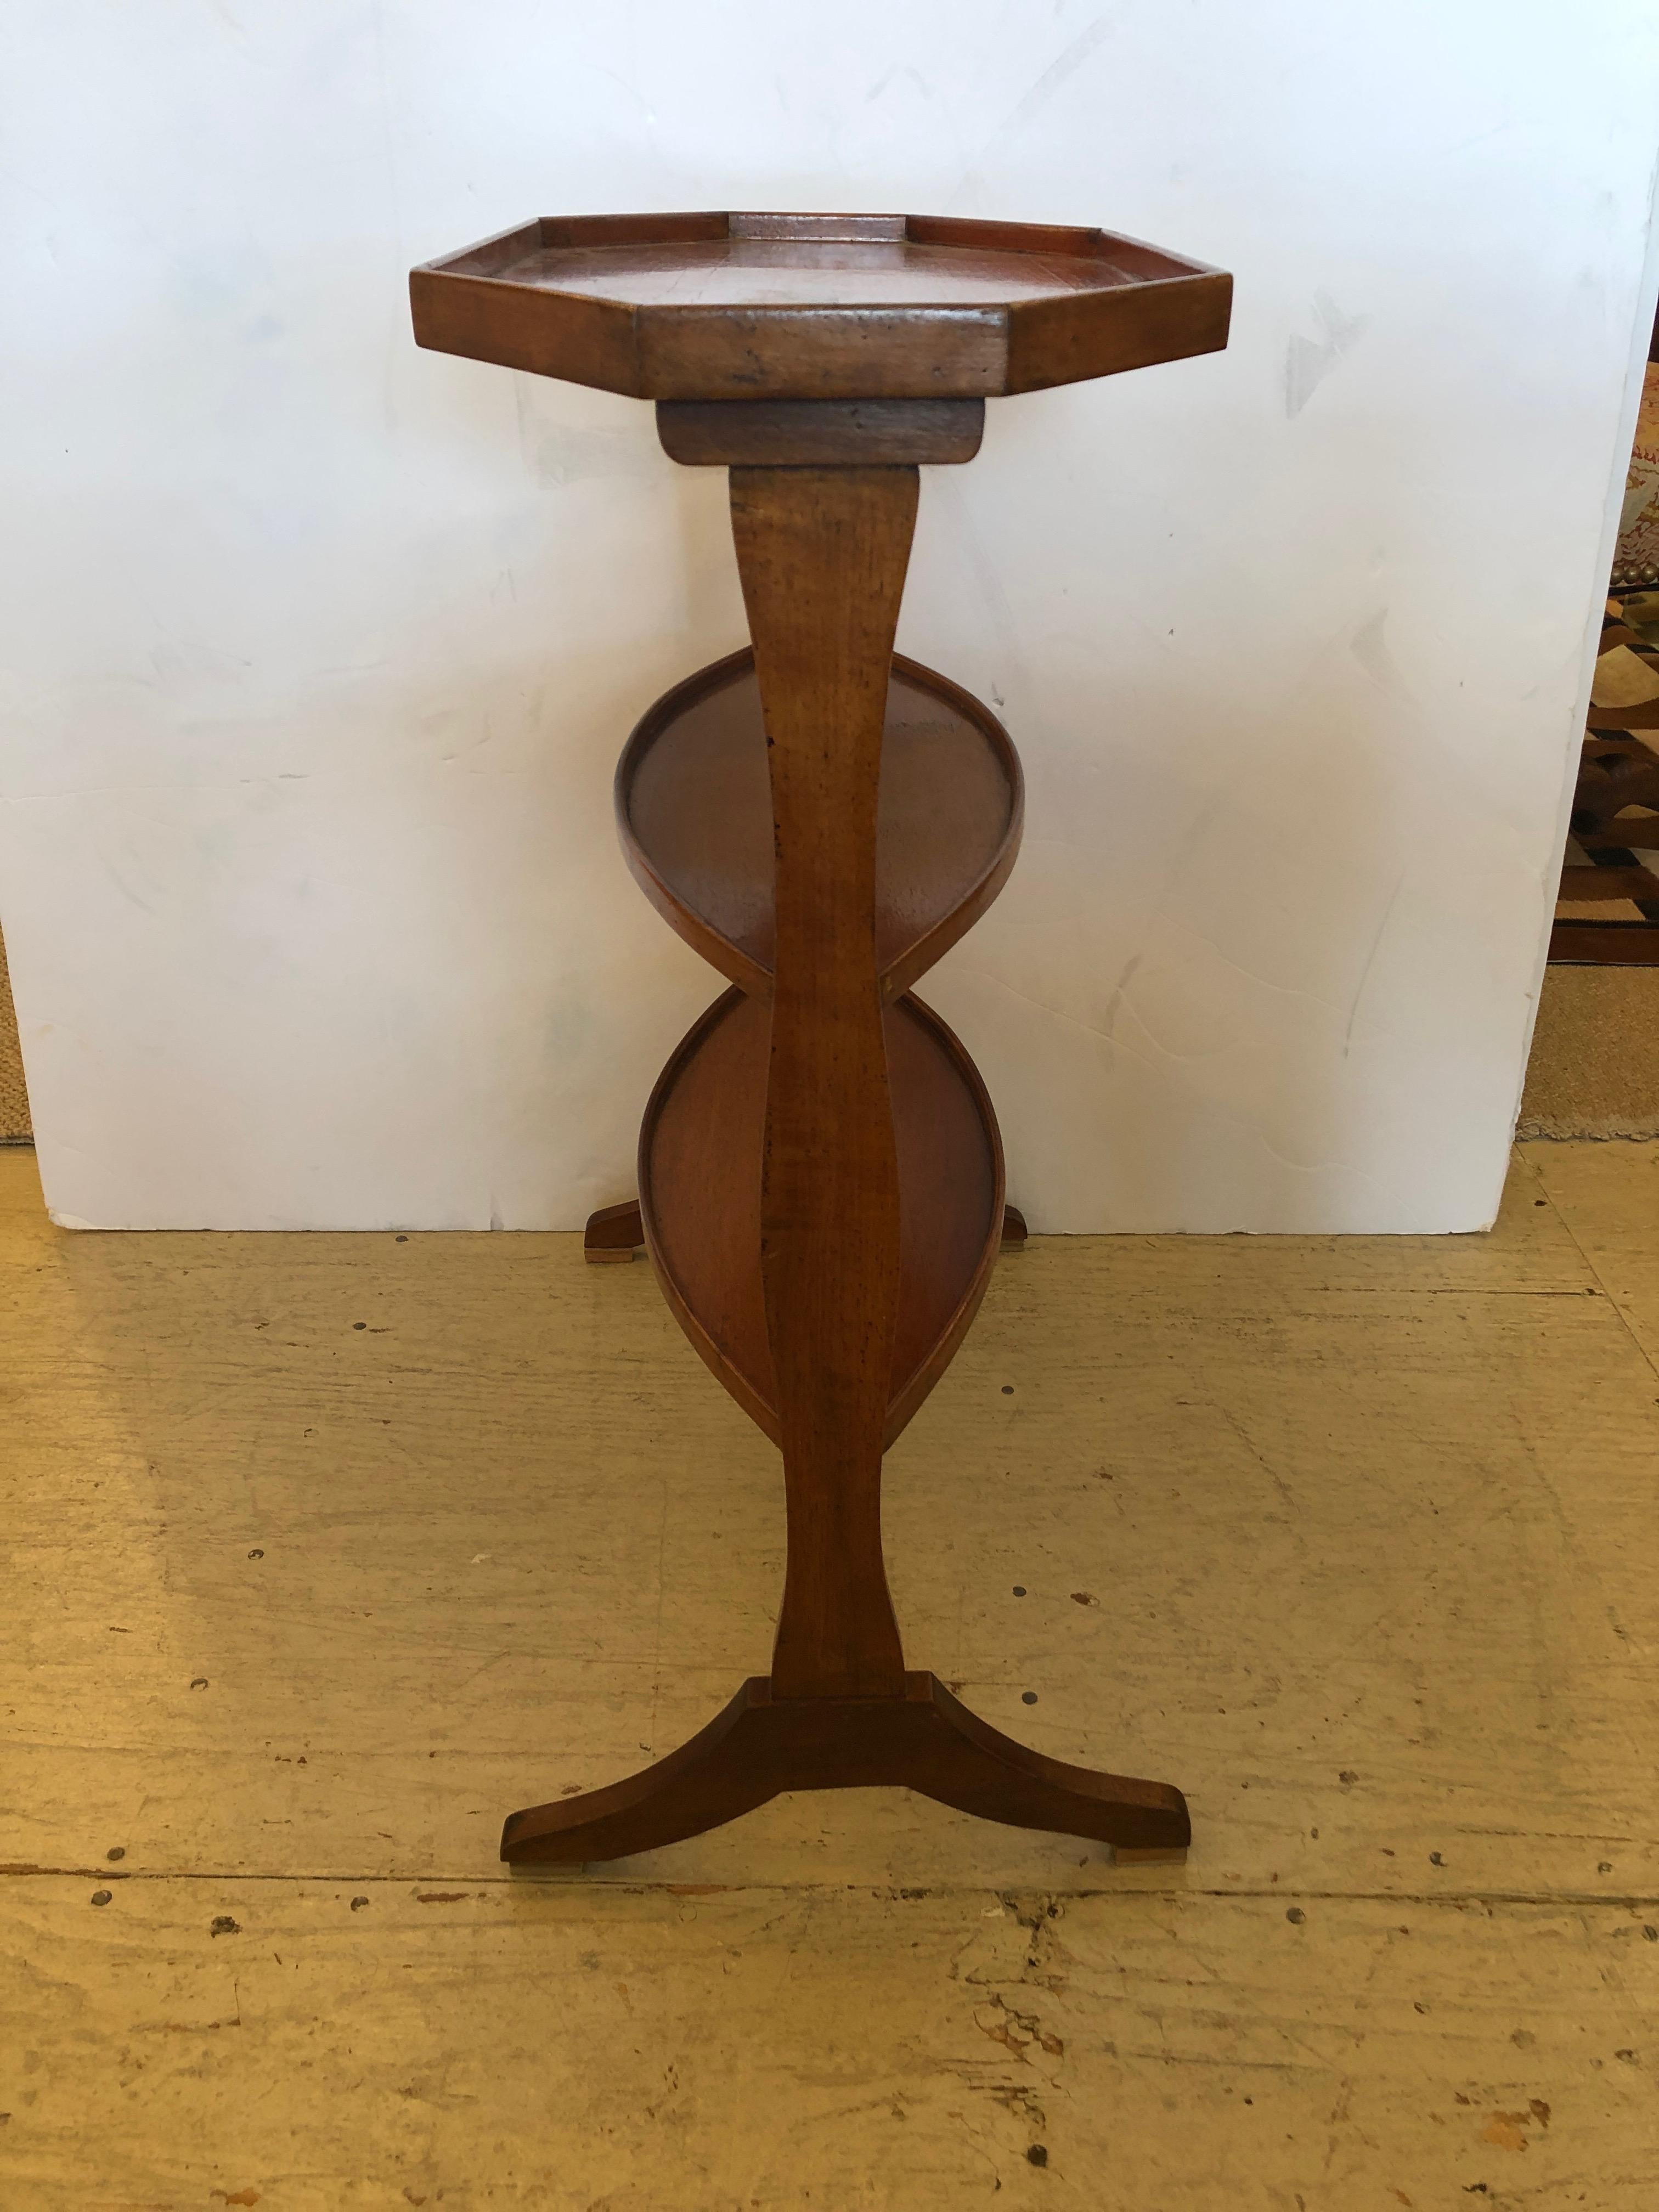 Superb antique Italian fruitwood side table having 3 tiers including an elongated octagonal top, two oval shelves below and a very elegant refined silouette.